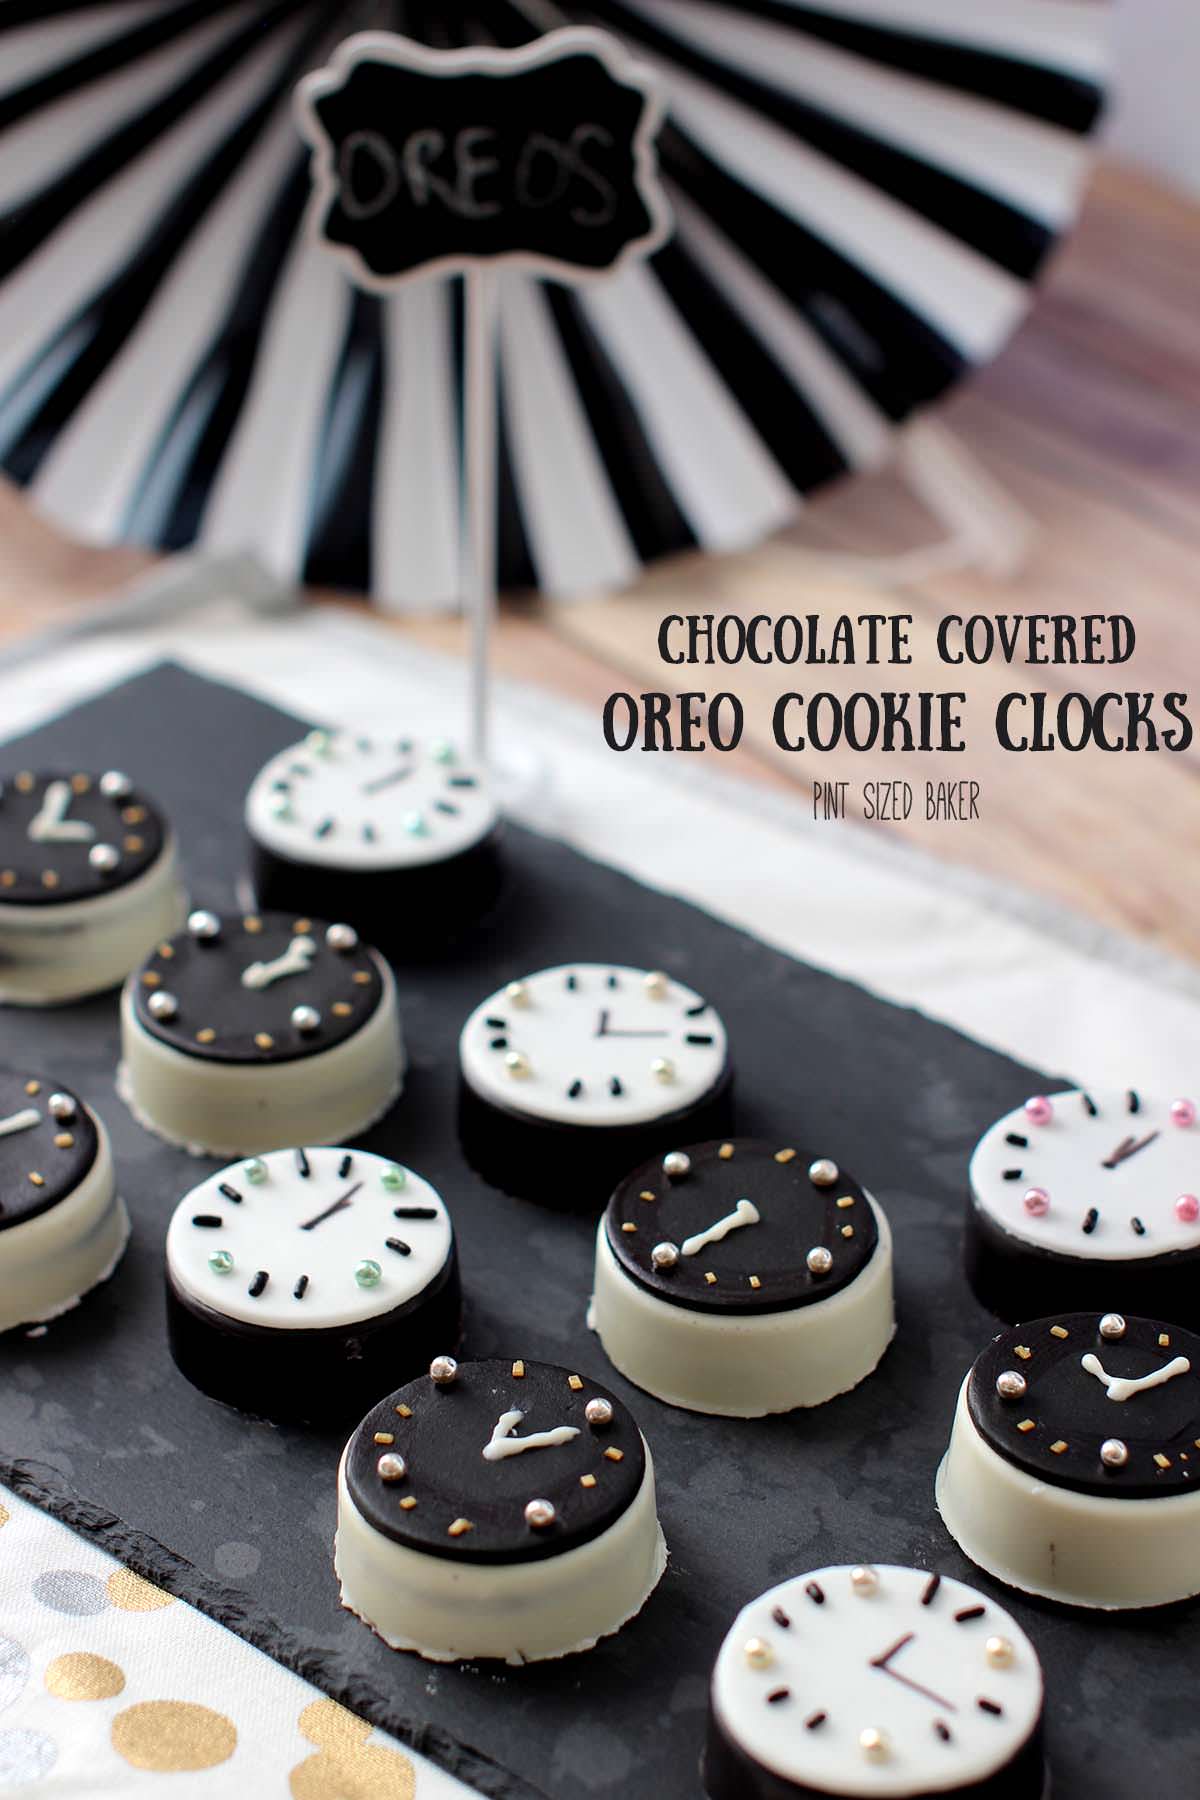 Count Down to the New Year with these fun Chocolate Covered Oreo Cookie Clocks. Perfect for you party!